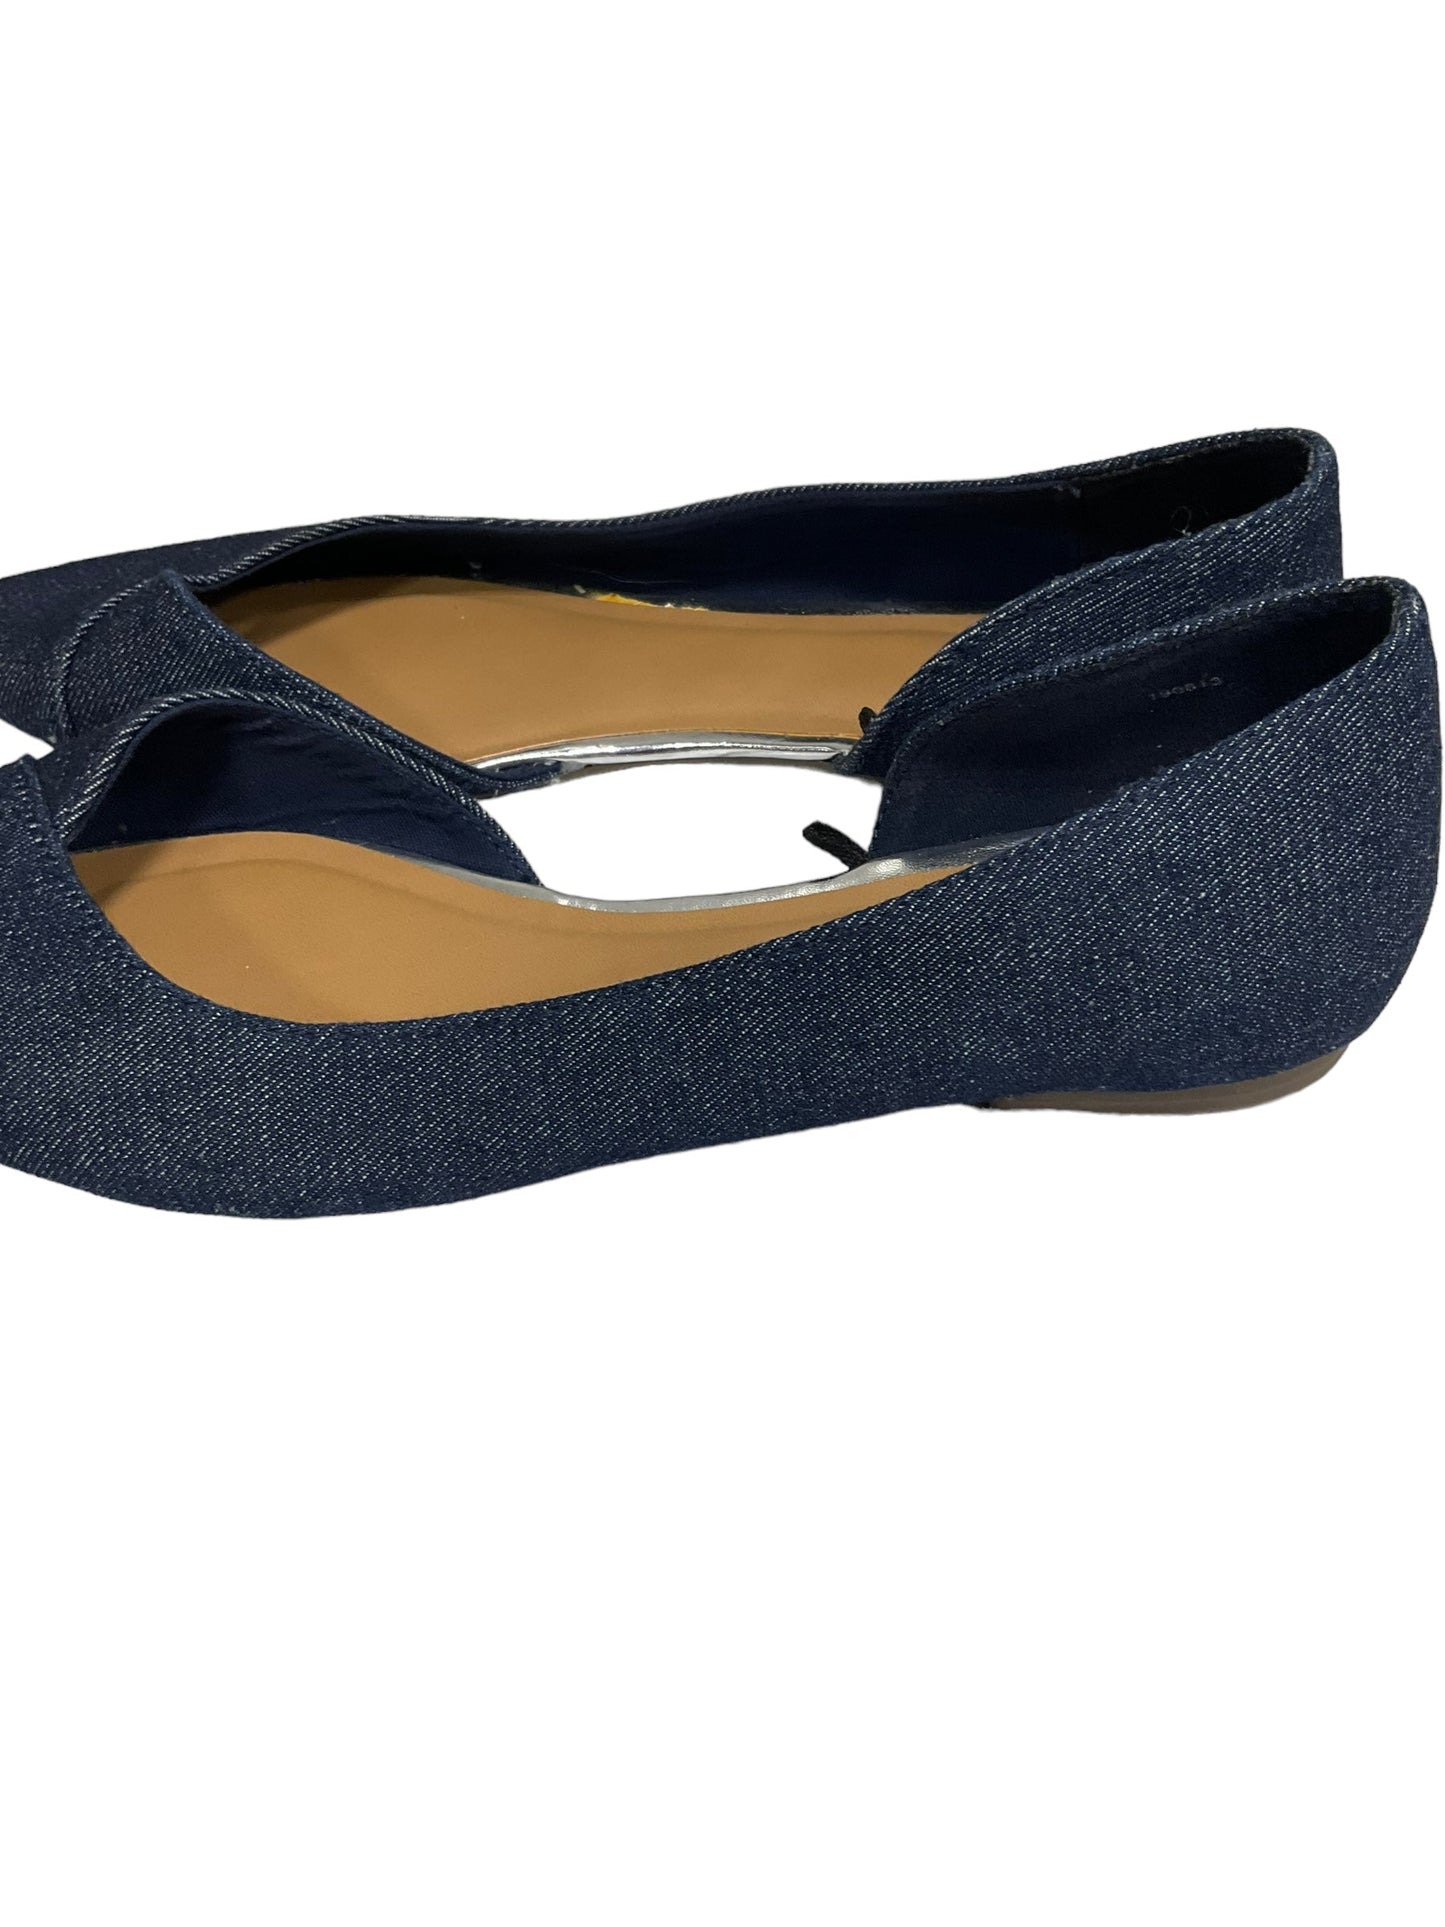 Shoes Flats Other By Gap O  Size: 9